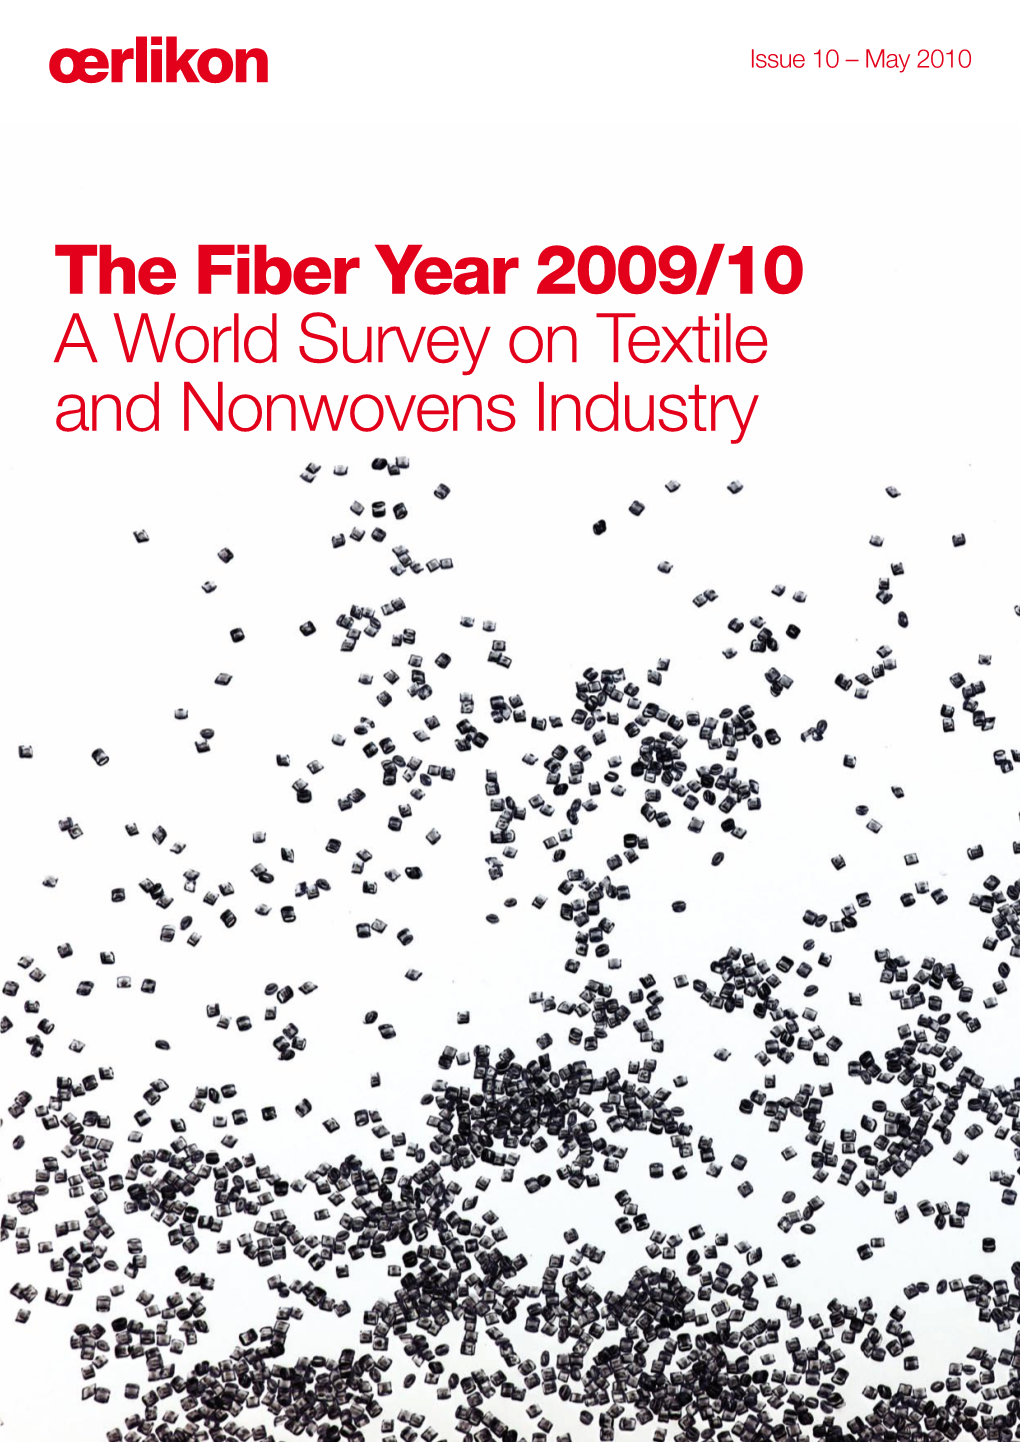 The Fiber Year 2009/10 a World Survey on Textile and Nonwovens Industry Dear Readers